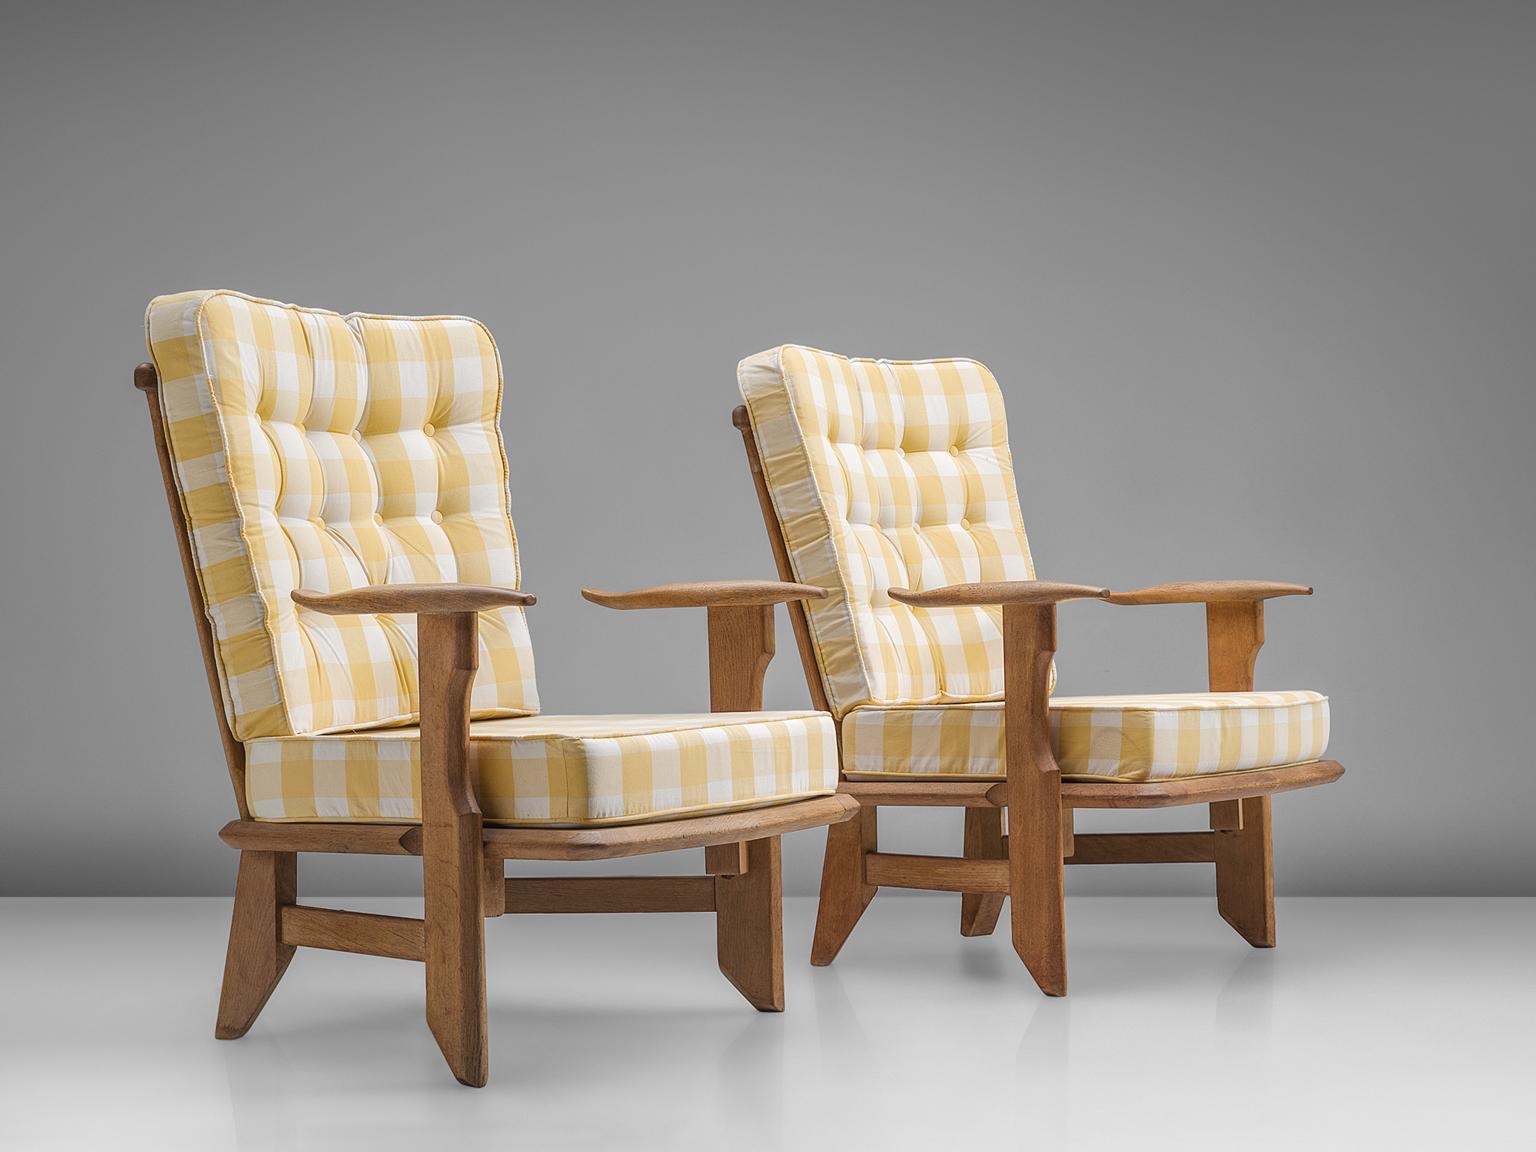 Lounge chairs oak, with a checked white and yellow colored upholstery by Guillerme et Chambron, France, 1960s. 

Guillerme and Chambron are known for their high quality solid oak furniture, from which this is another great example. These chairs has